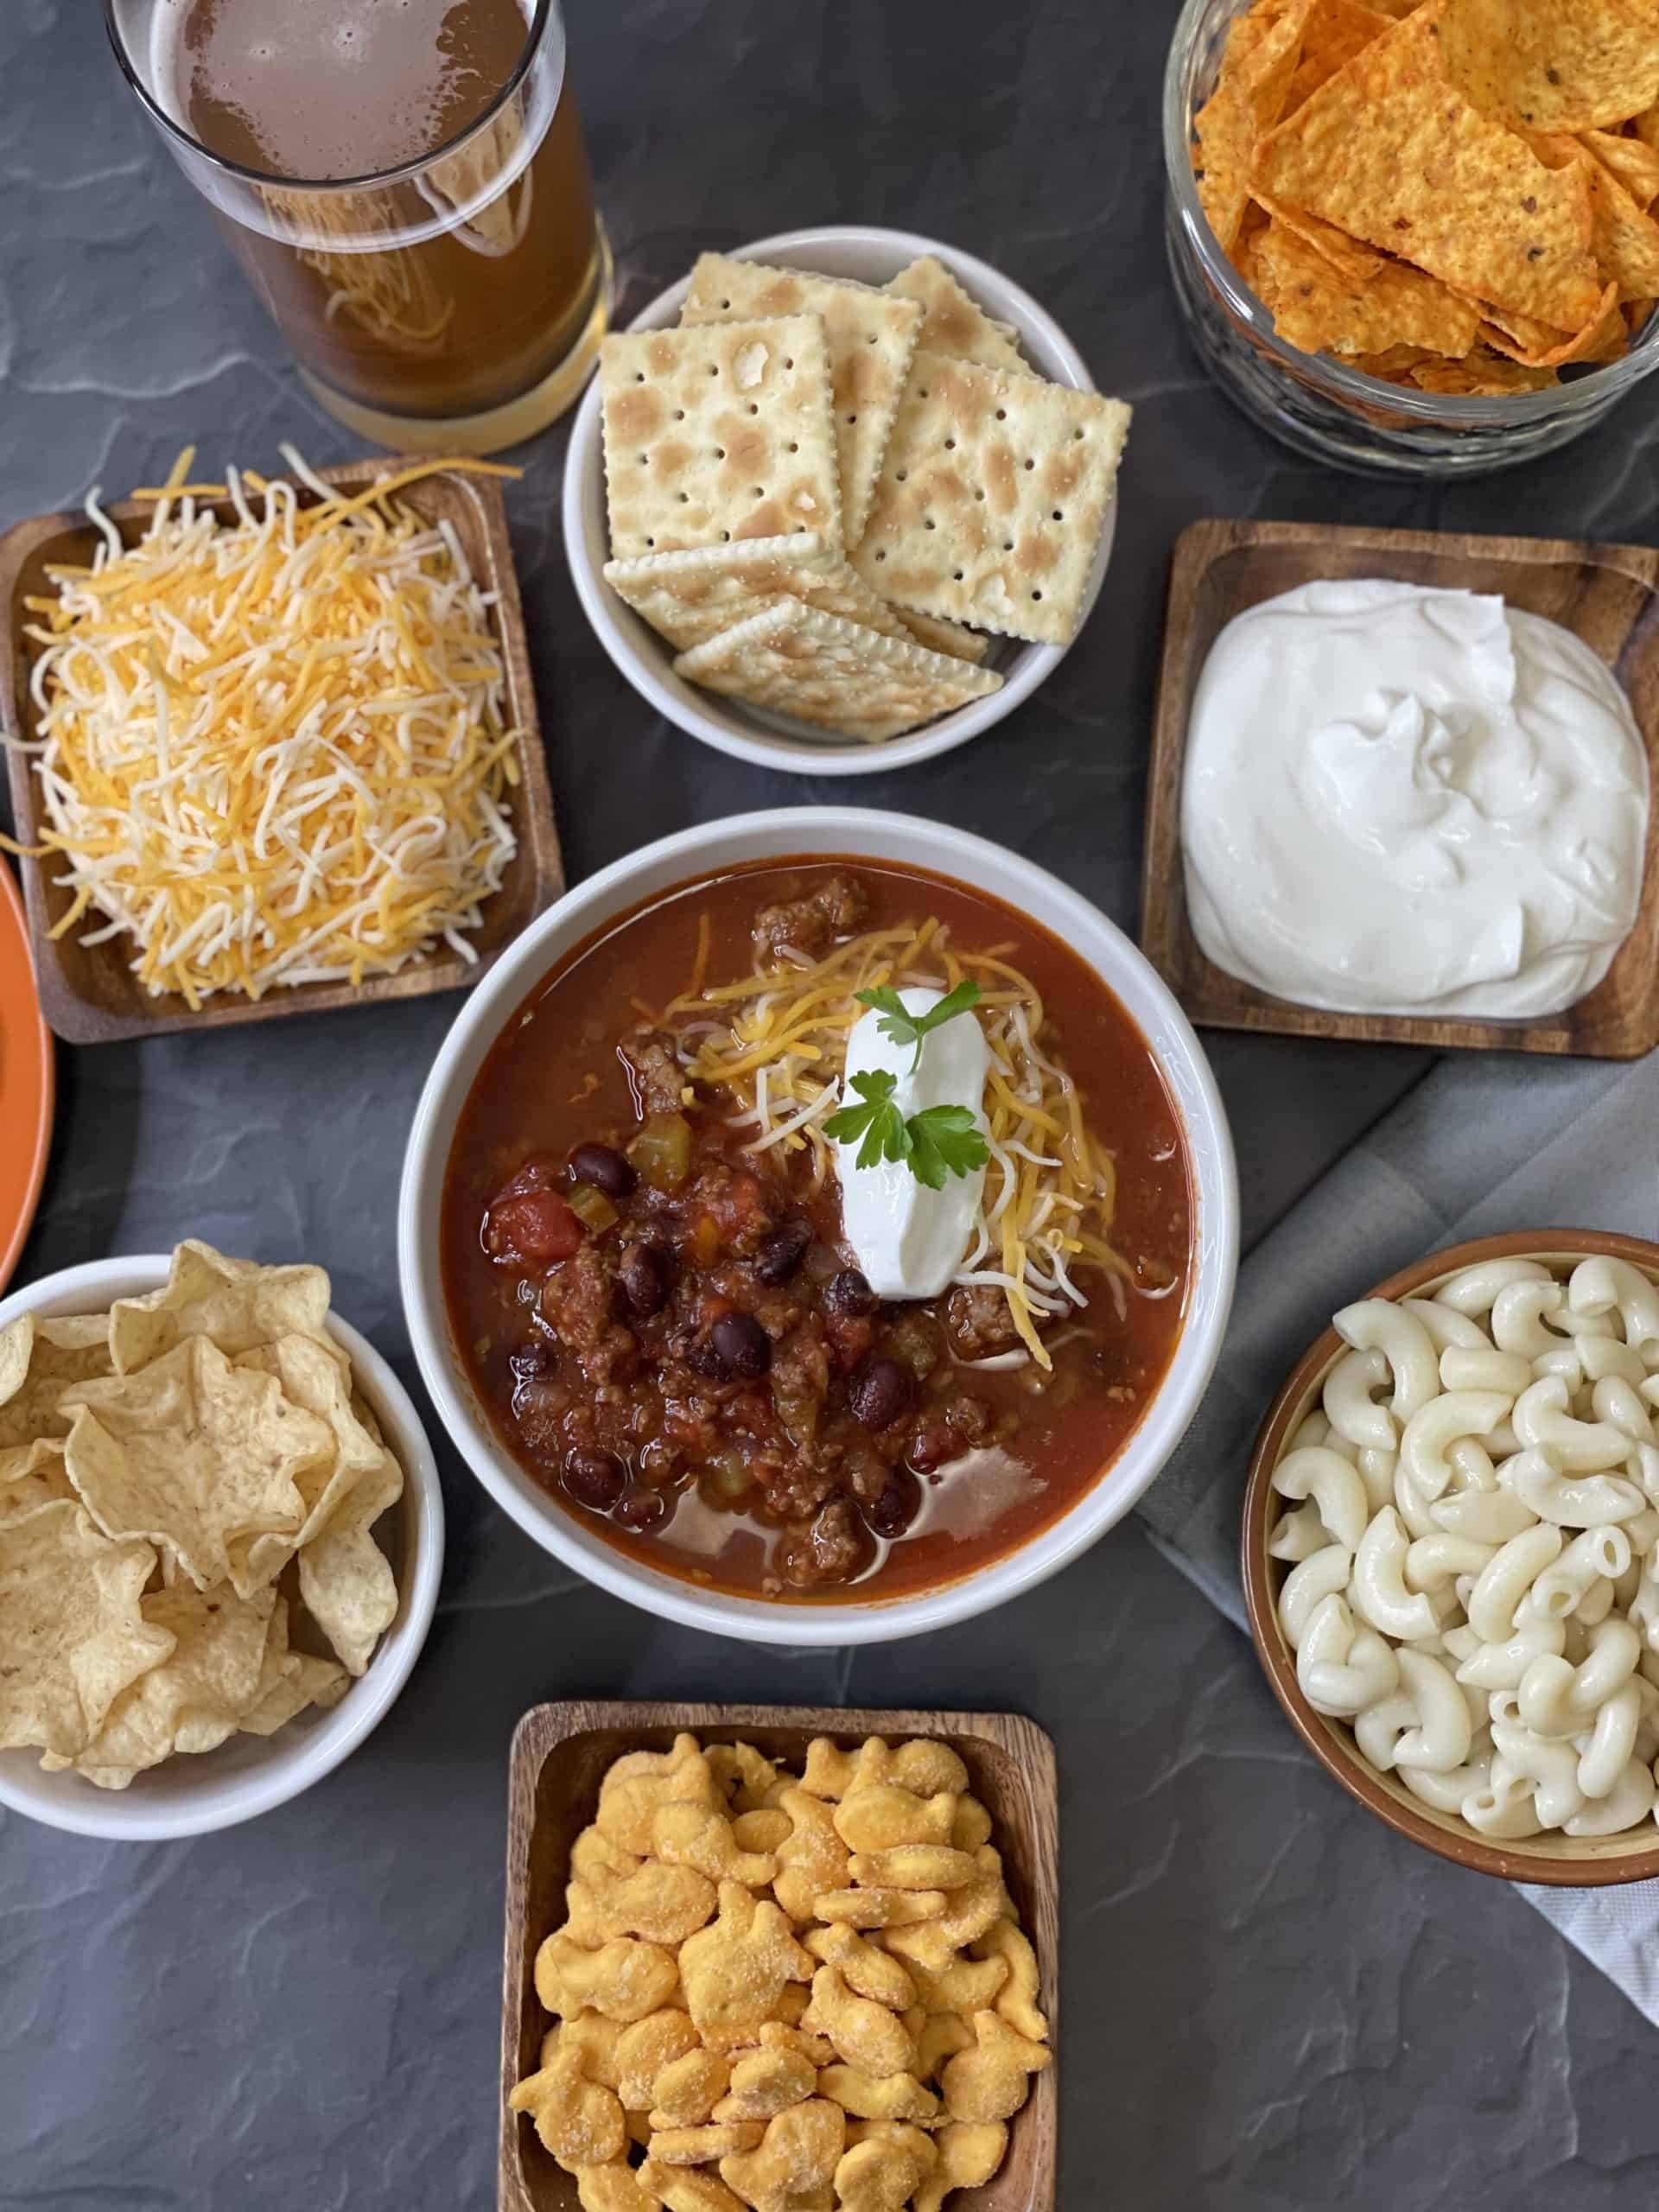 Venison Chili Bar - Chili, Sour Cream, Shredded Cheese, Saltine Crackers, Cooked Noodles, Tortilla Chips, & Gold Fish Crackers